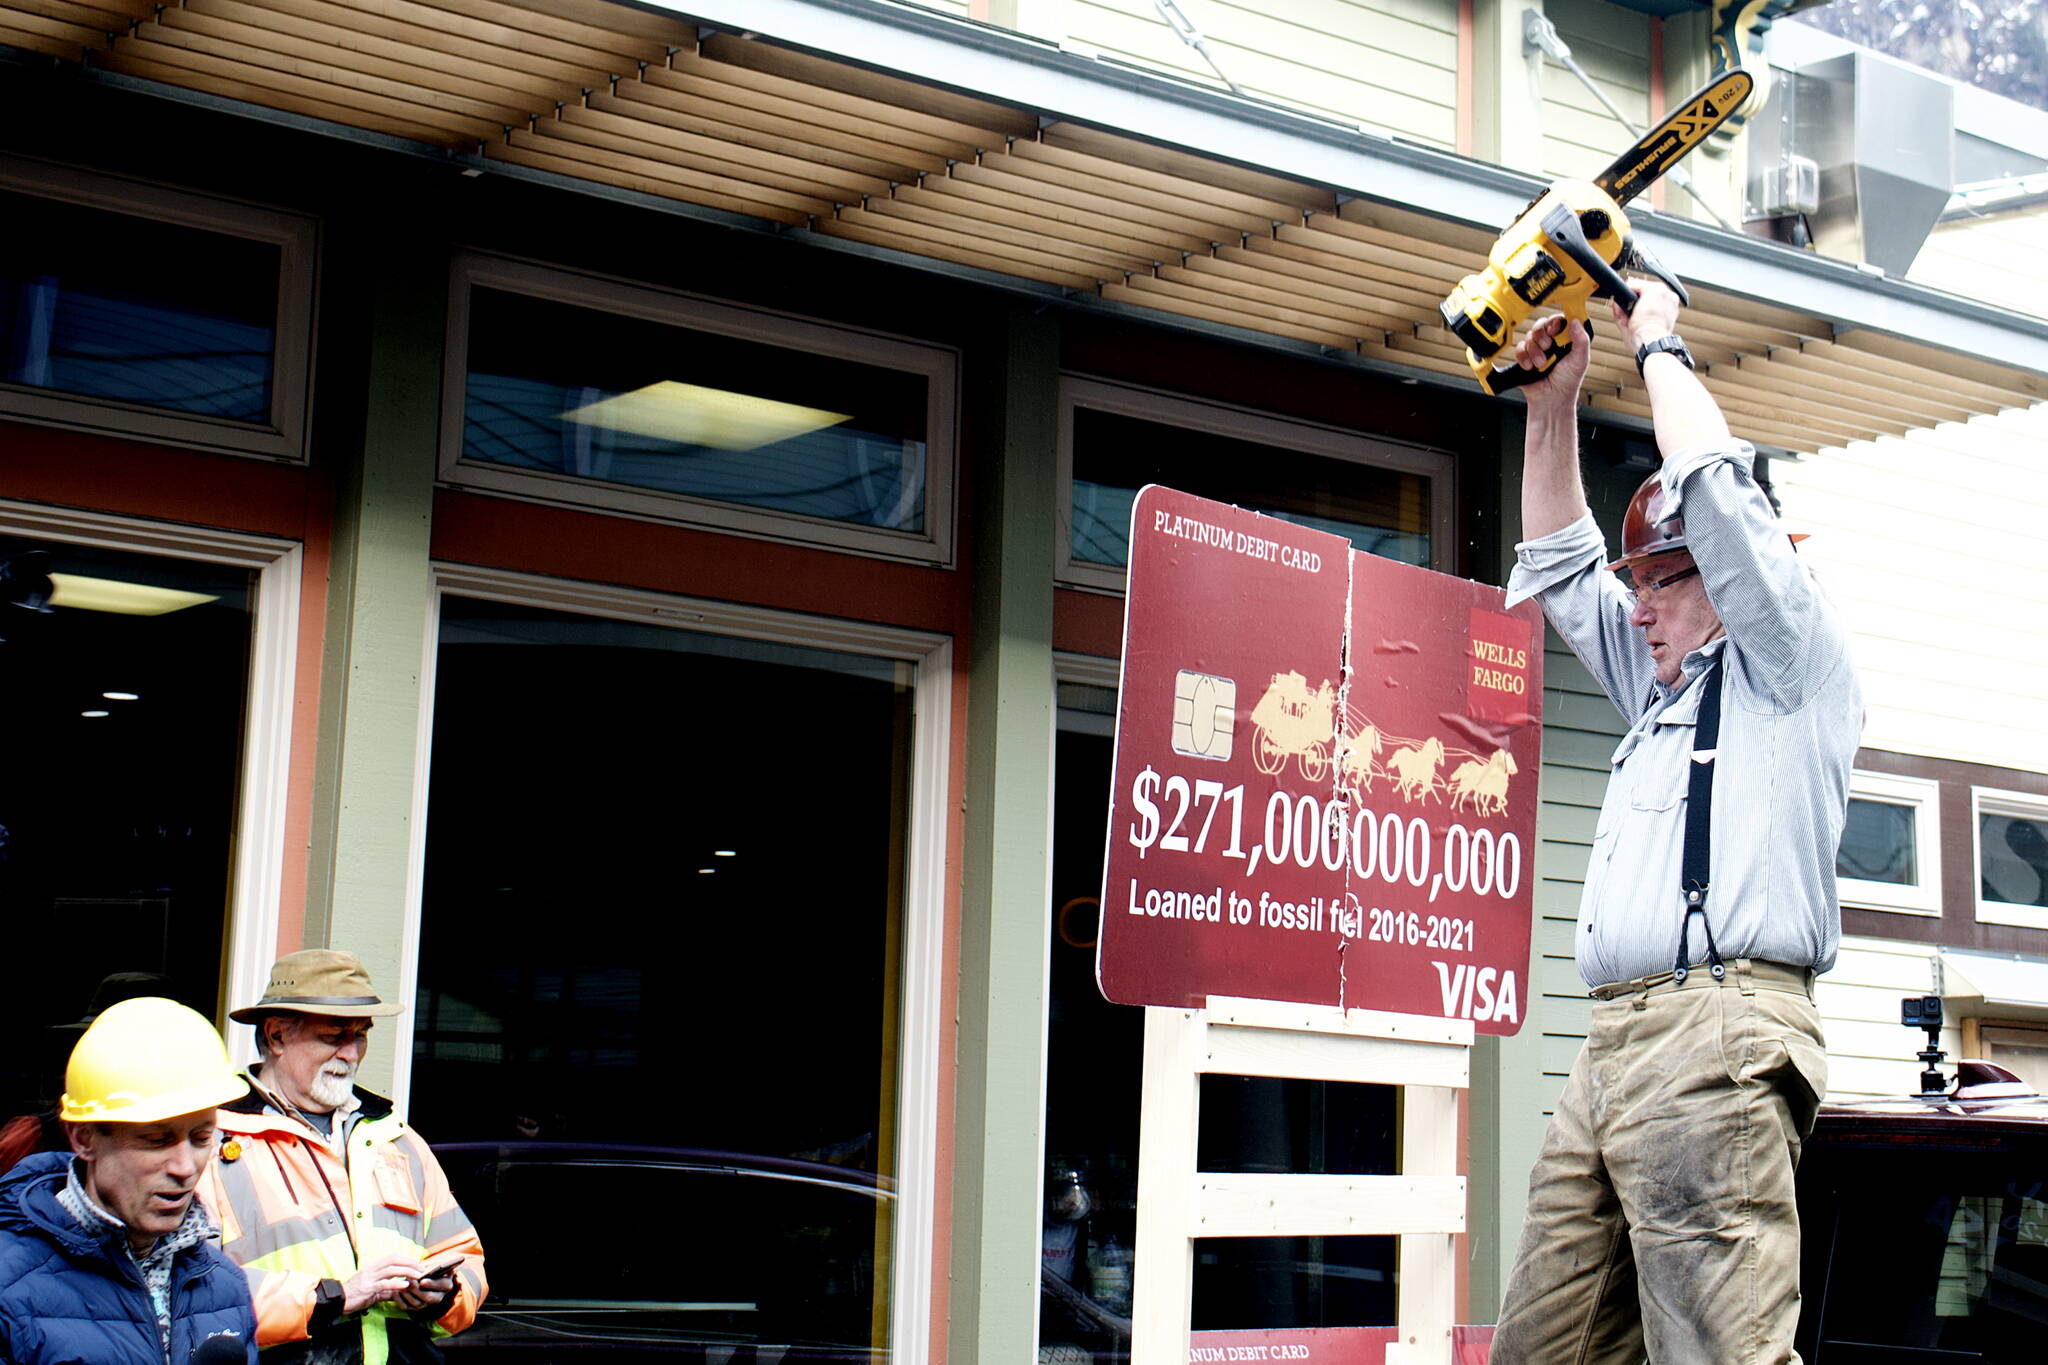 Bob Schroeder takes an electric chainsaw to a mock credit card during a protest outside the Wells Fargo in downtown Juneau at midday Tuesday. Schroeder cut up three mock credit cards representing three banks in Juneau protesters say are leading funders of fossil fuel development projects. (Mark Sabbatini / Juneau Empire)